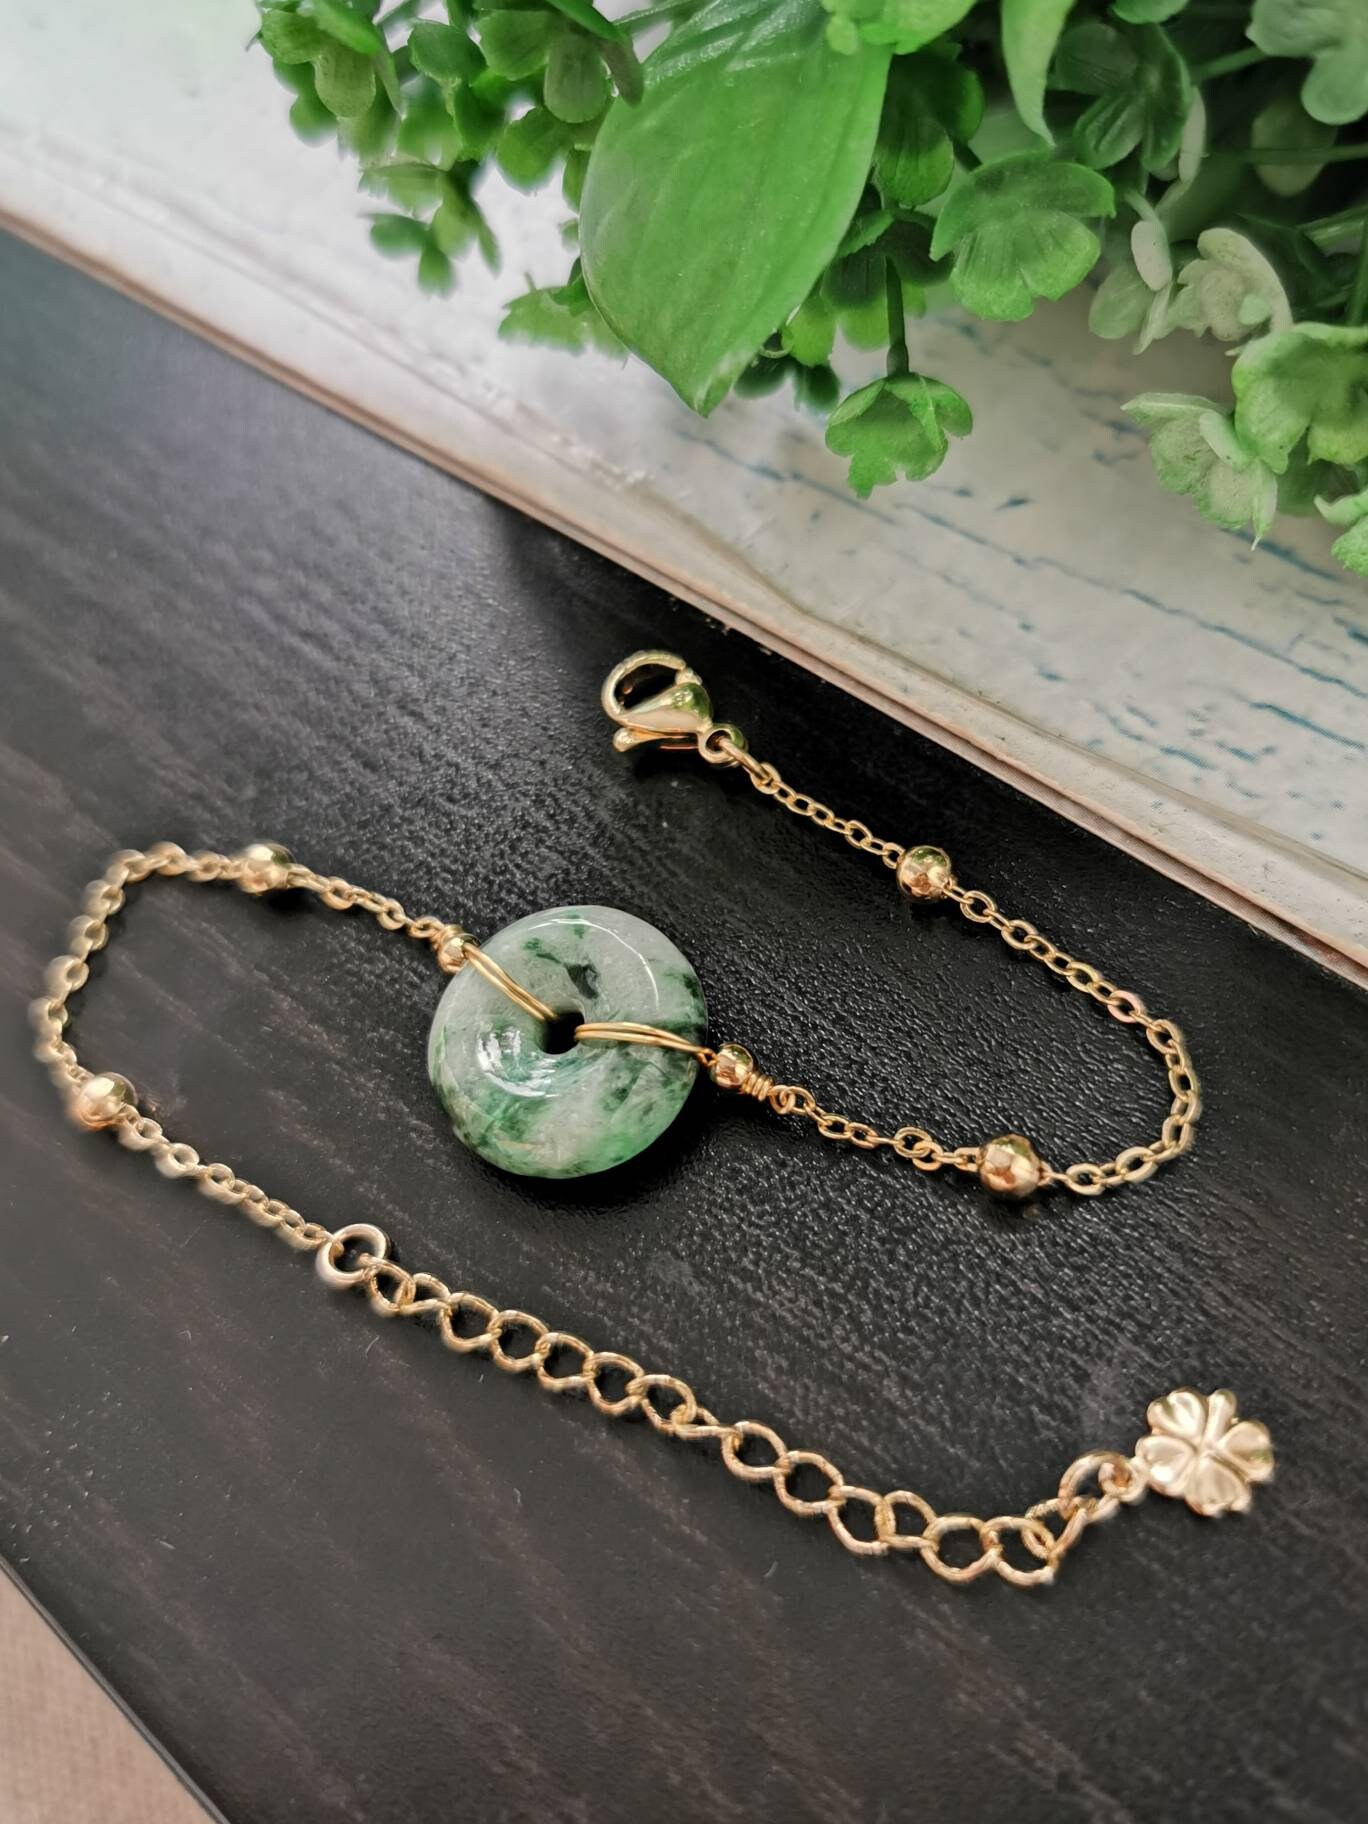 Floral Green Type A Grade A Natural Jadeite Jade Fei Cui Donut Bracelet in  14K Gold Filled Bail Setting - Etsy